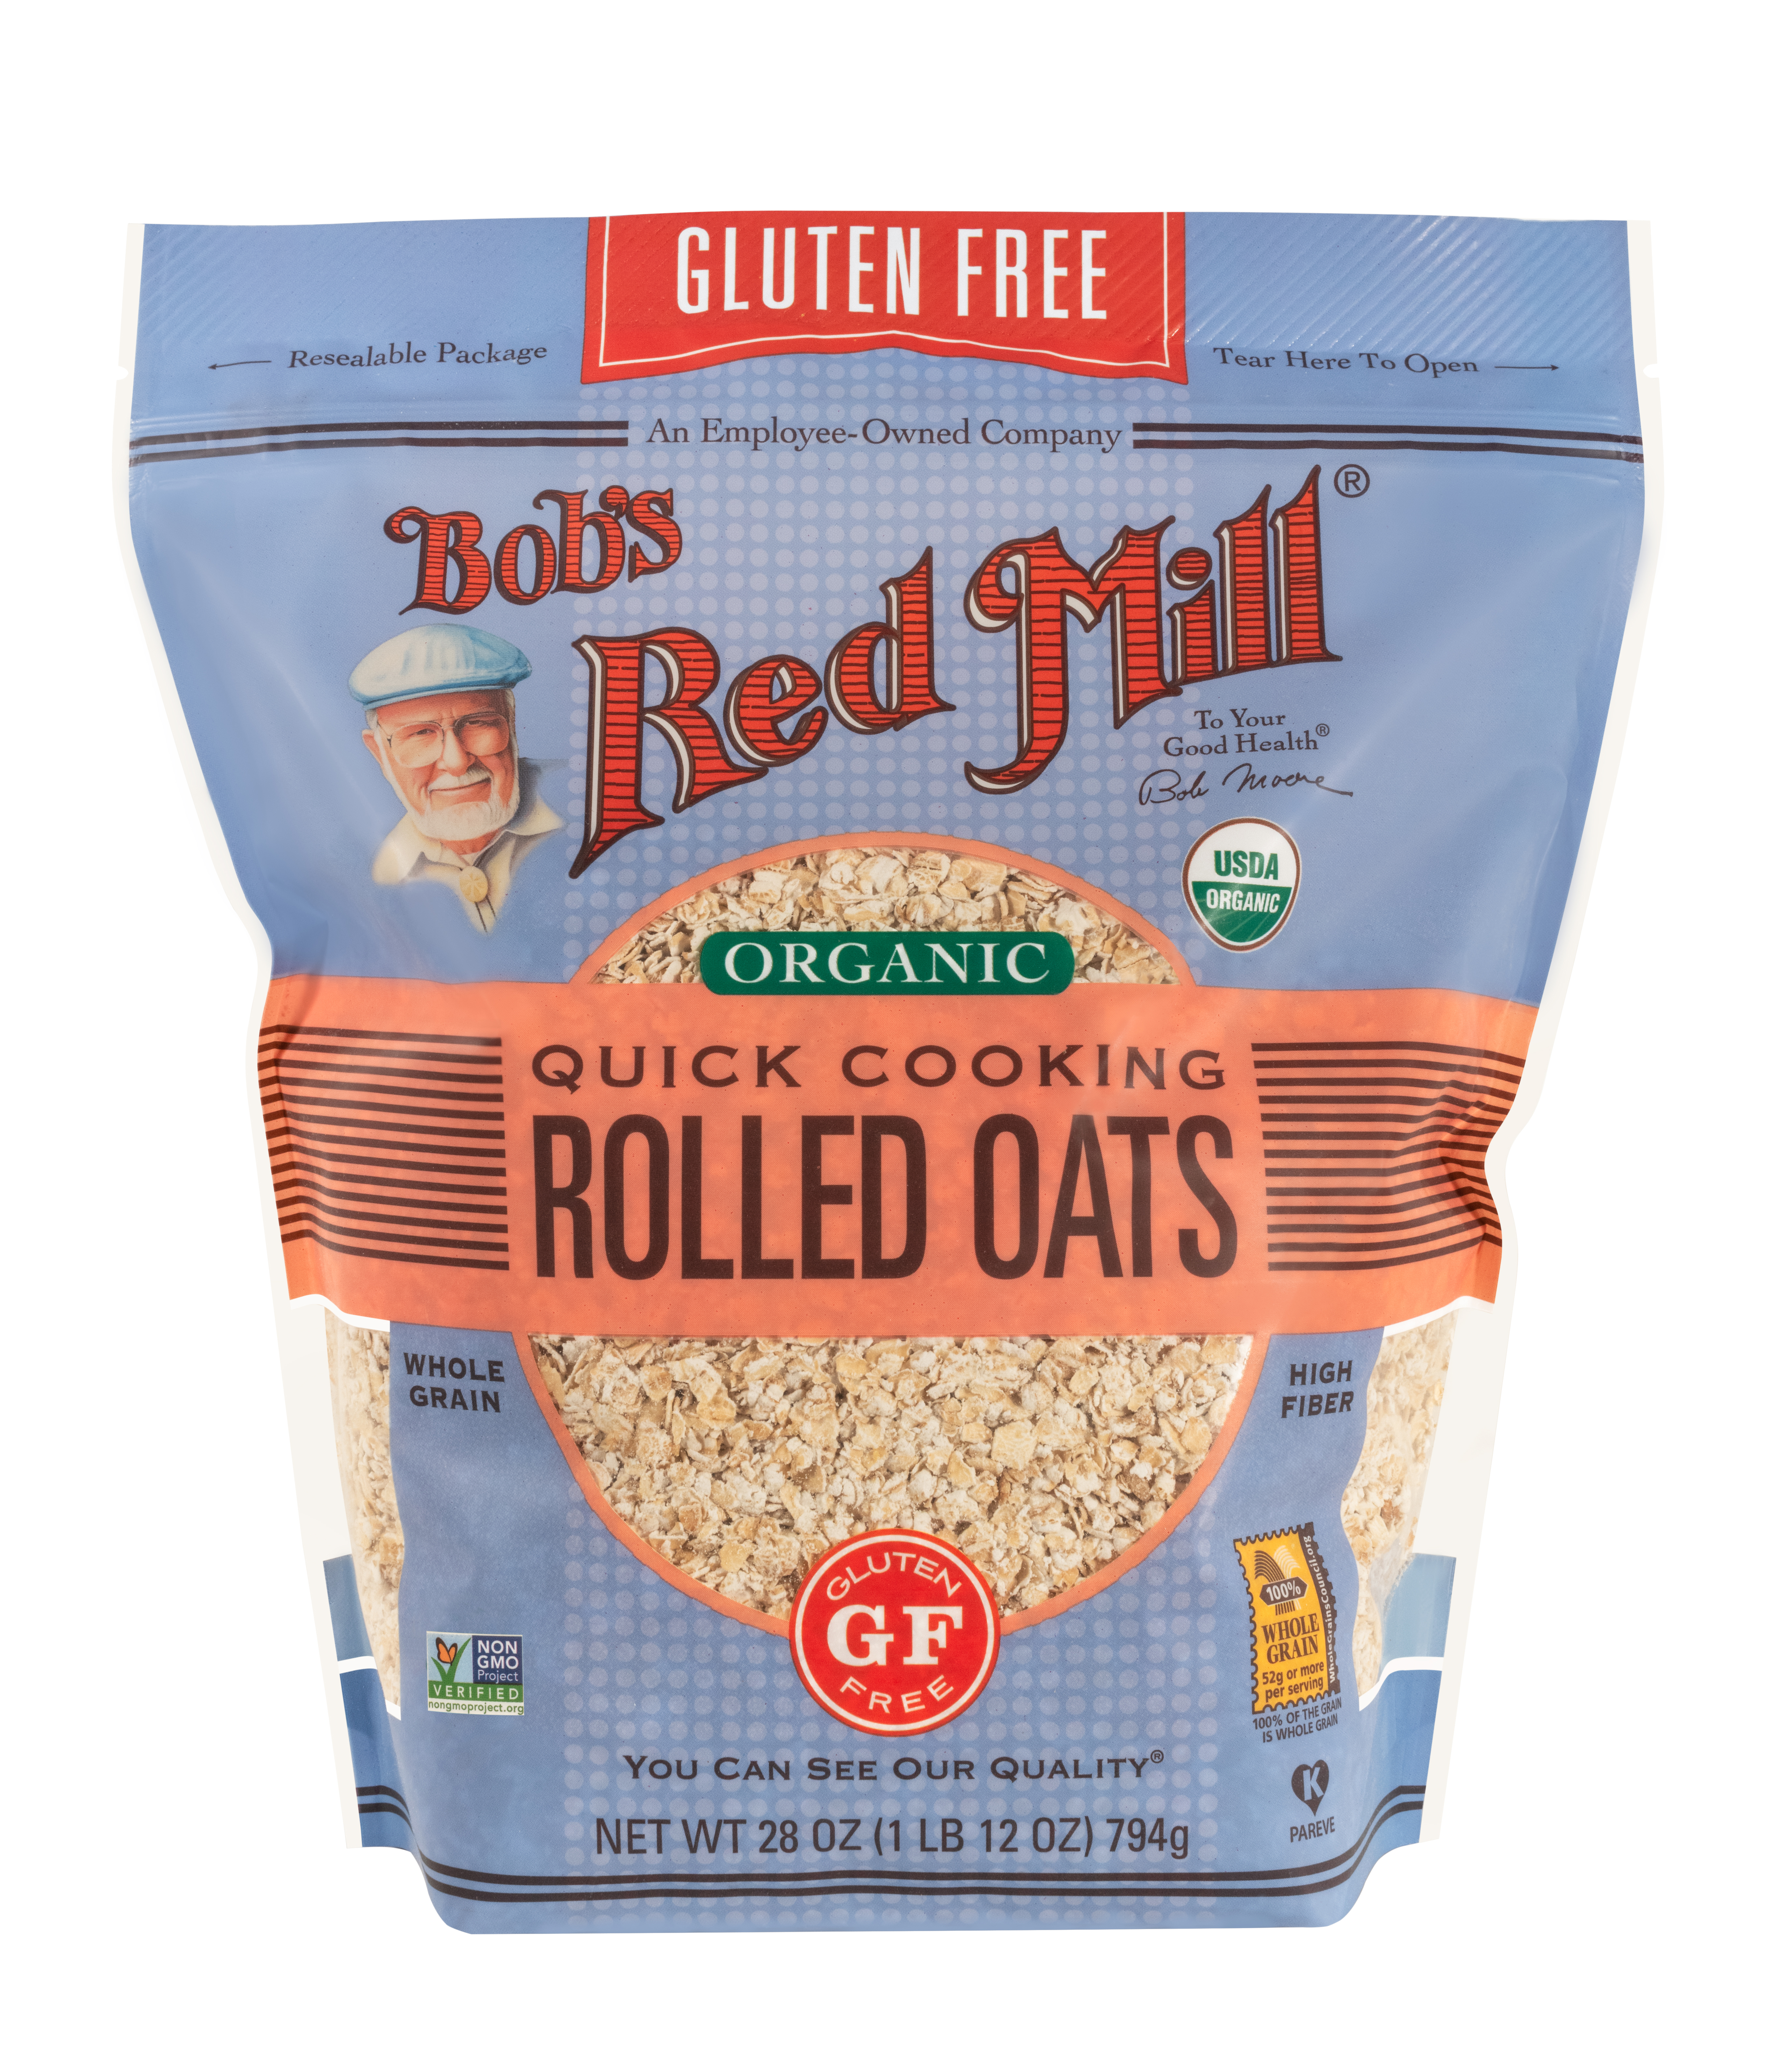 Gluten Free Organic Quick Cooking Rolled Oats- front